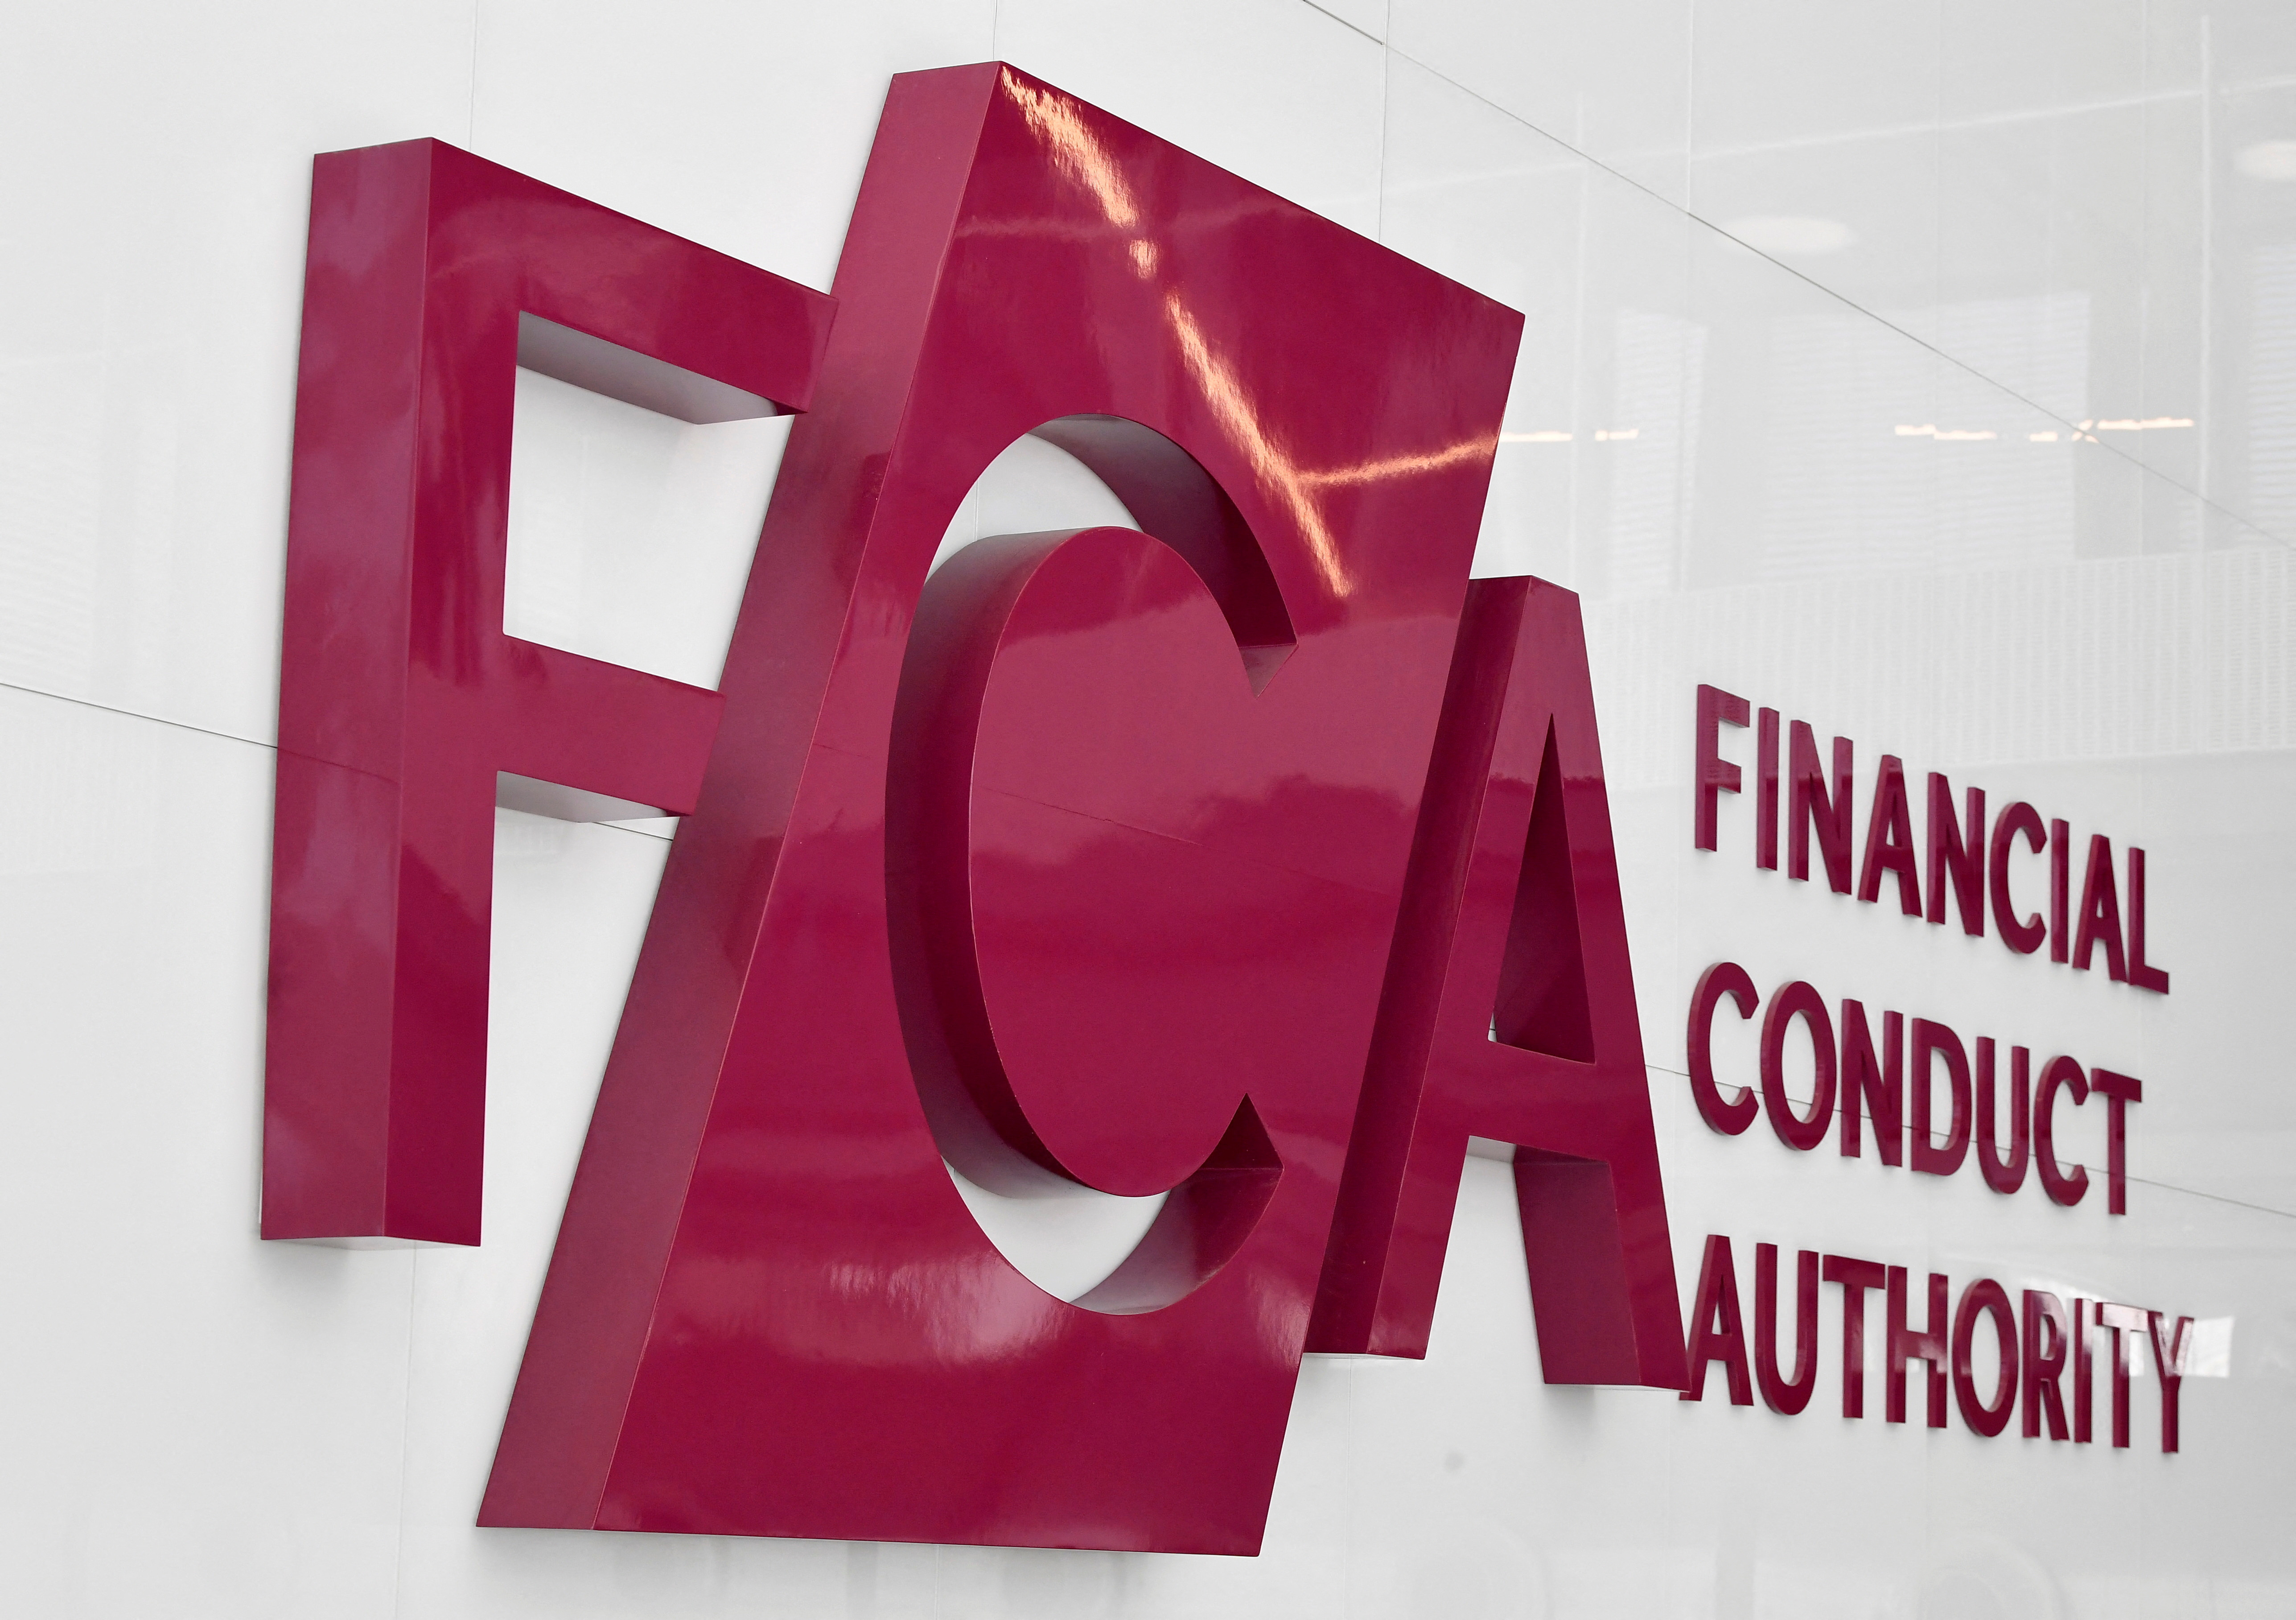 FCA signage is seen at the British regulatory body's head office in London